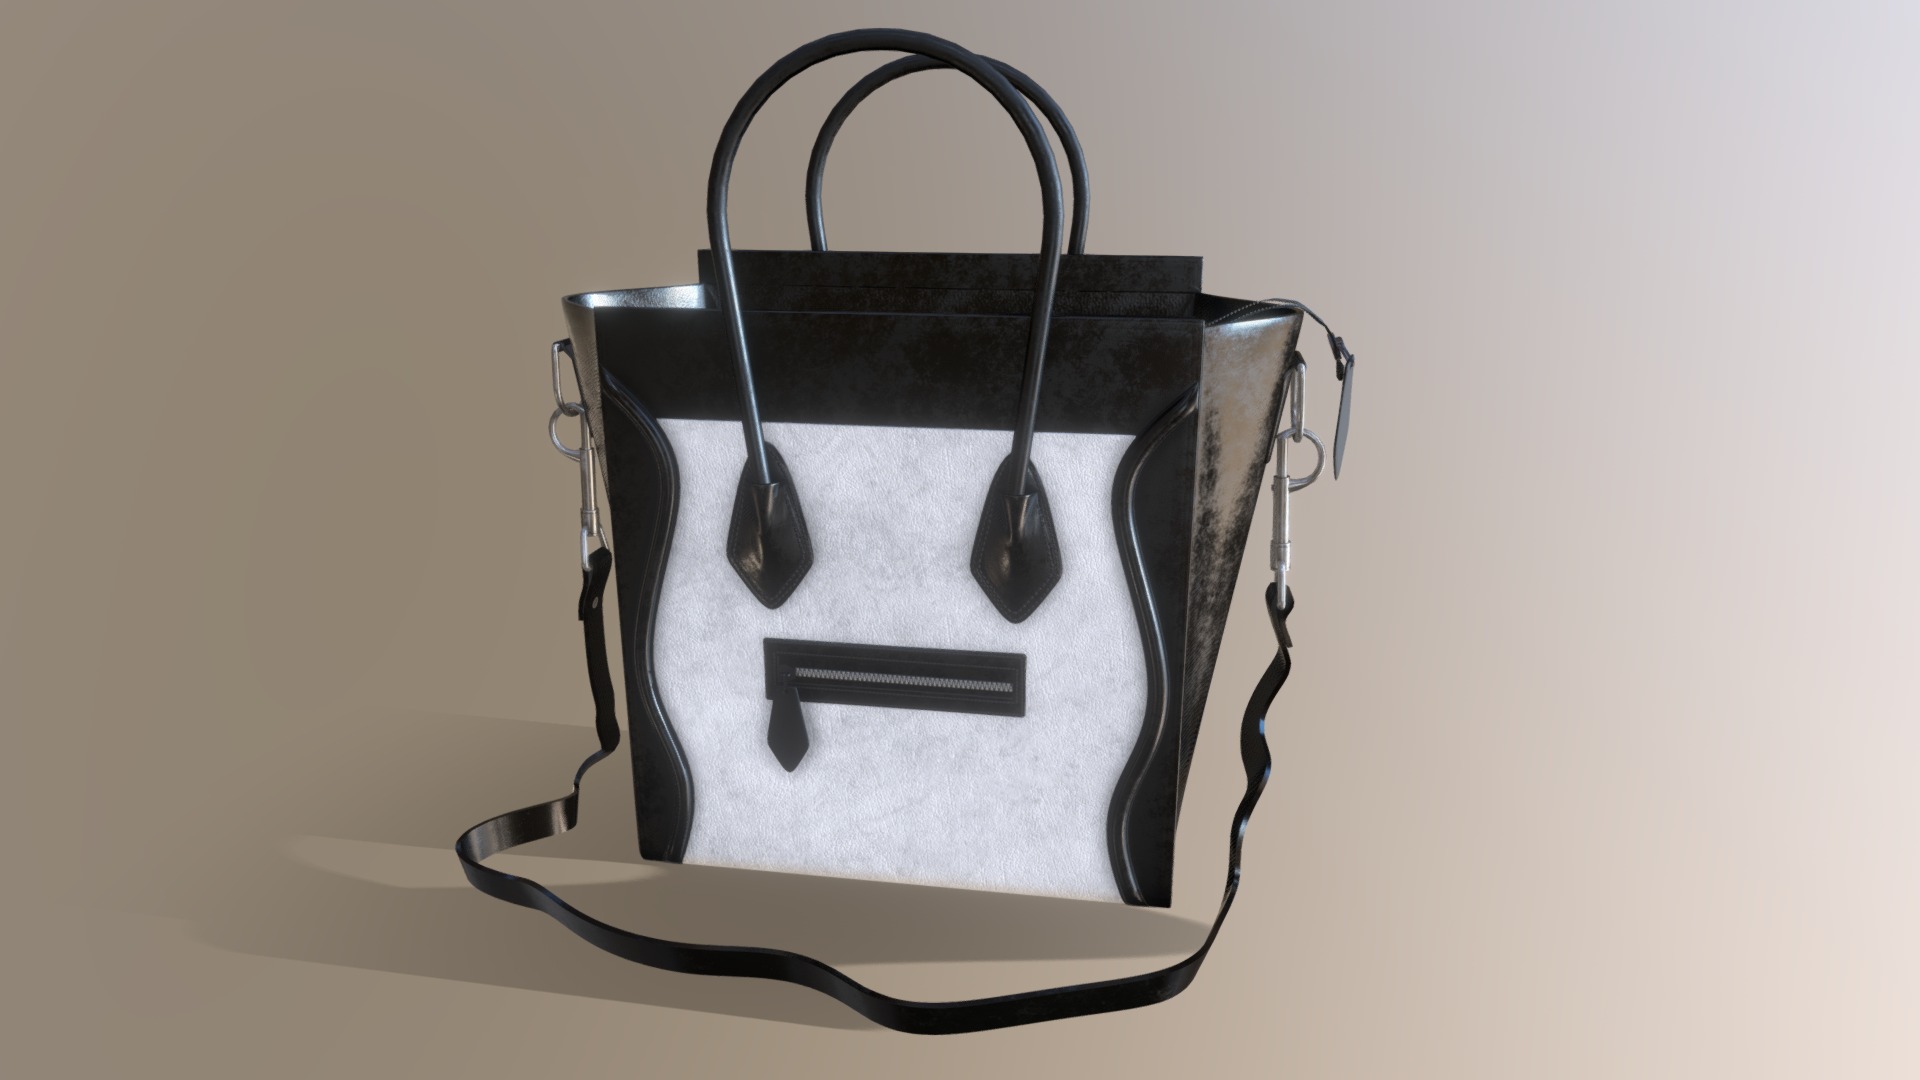 3D model Handbag - This is a 3D model of the Handbag. The 3D model is about a black and white bag.